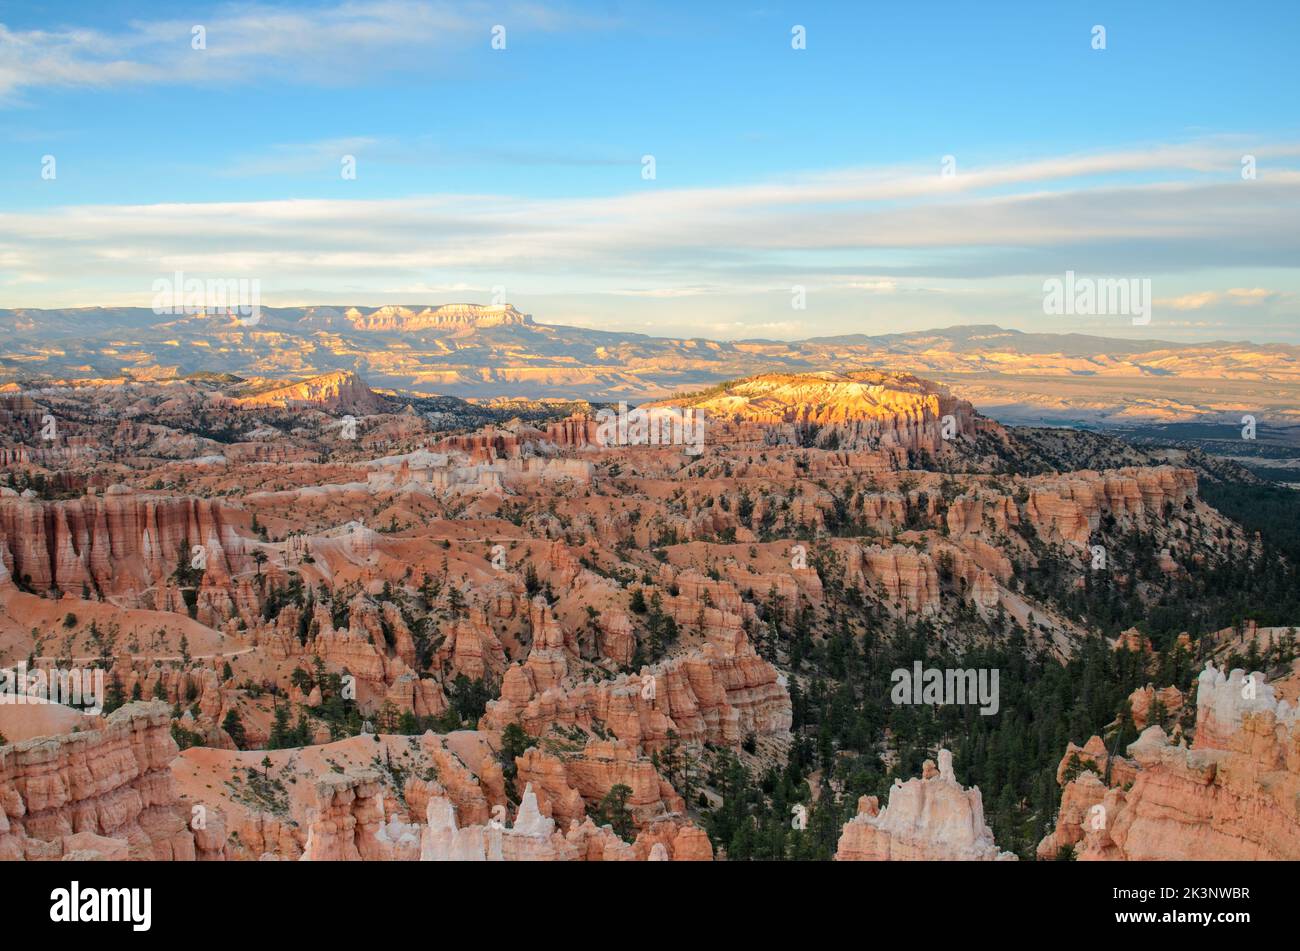 The Hoodoos of Bryce Canyon National Park in Utah, USA. Stock Photo